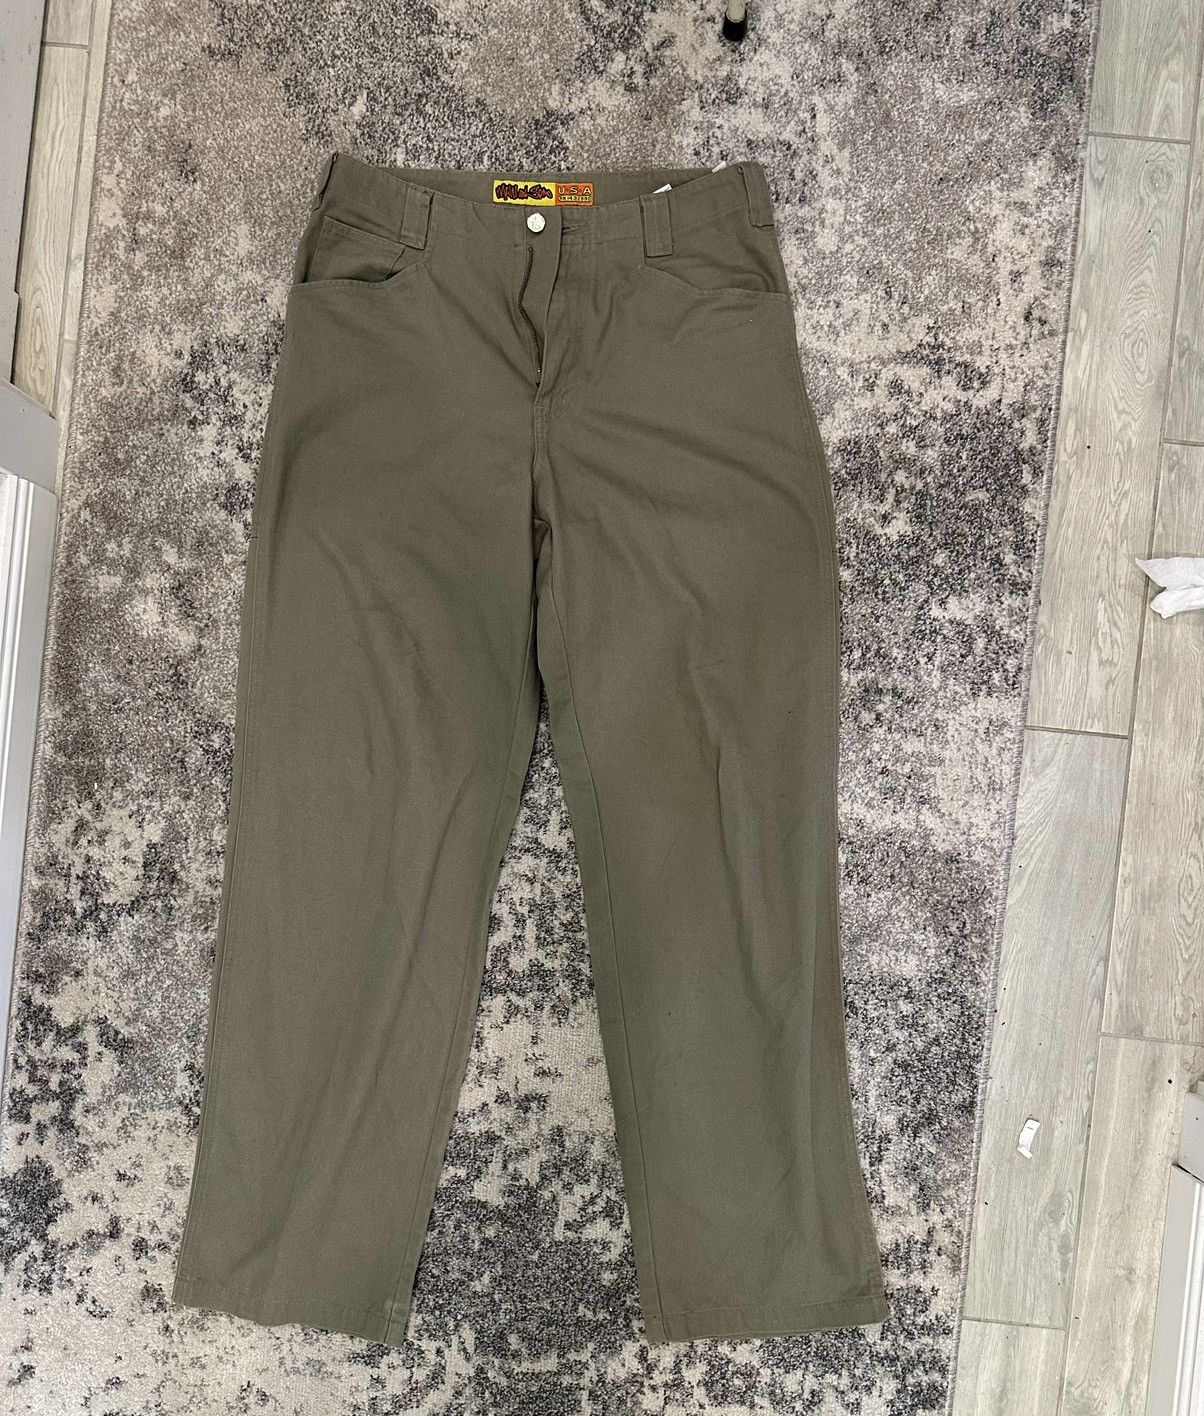 Maui And Sons Maui and sons oversized baggy skate pants | Grailed